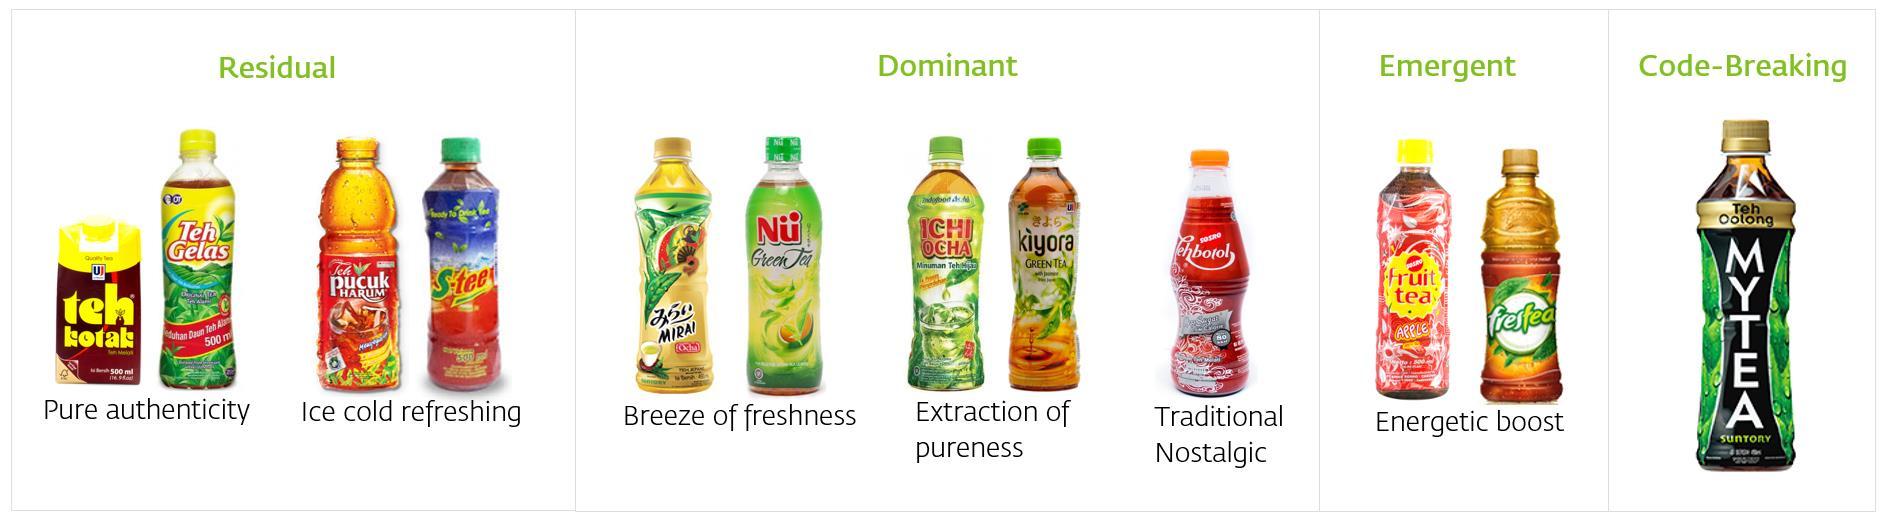 A Market Entry Research for RTD Tea showing shifting trends in RTD packaging design in Indonesia.